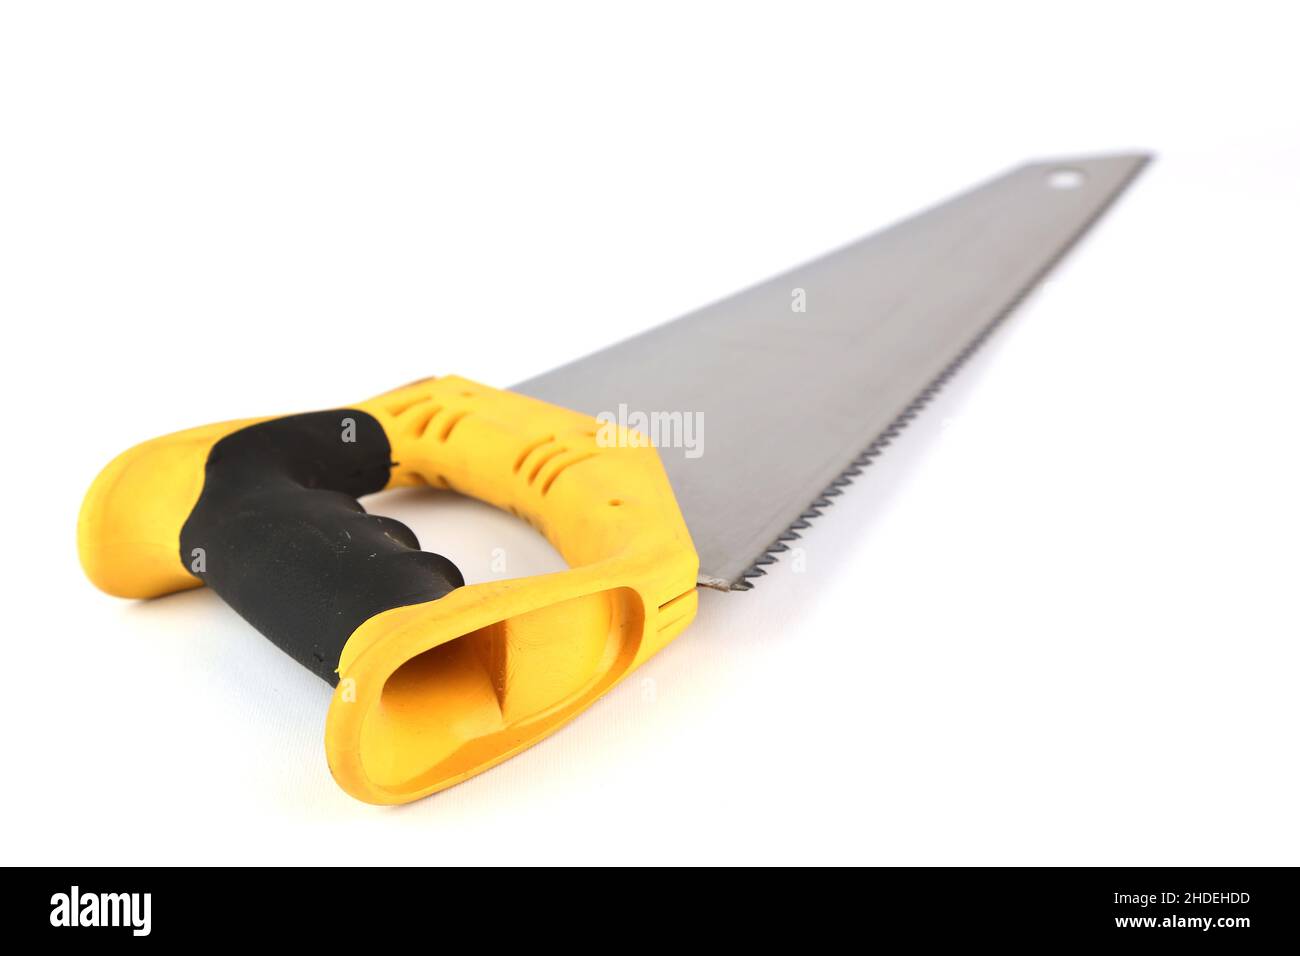 A handsaw on the white background Stock Photo